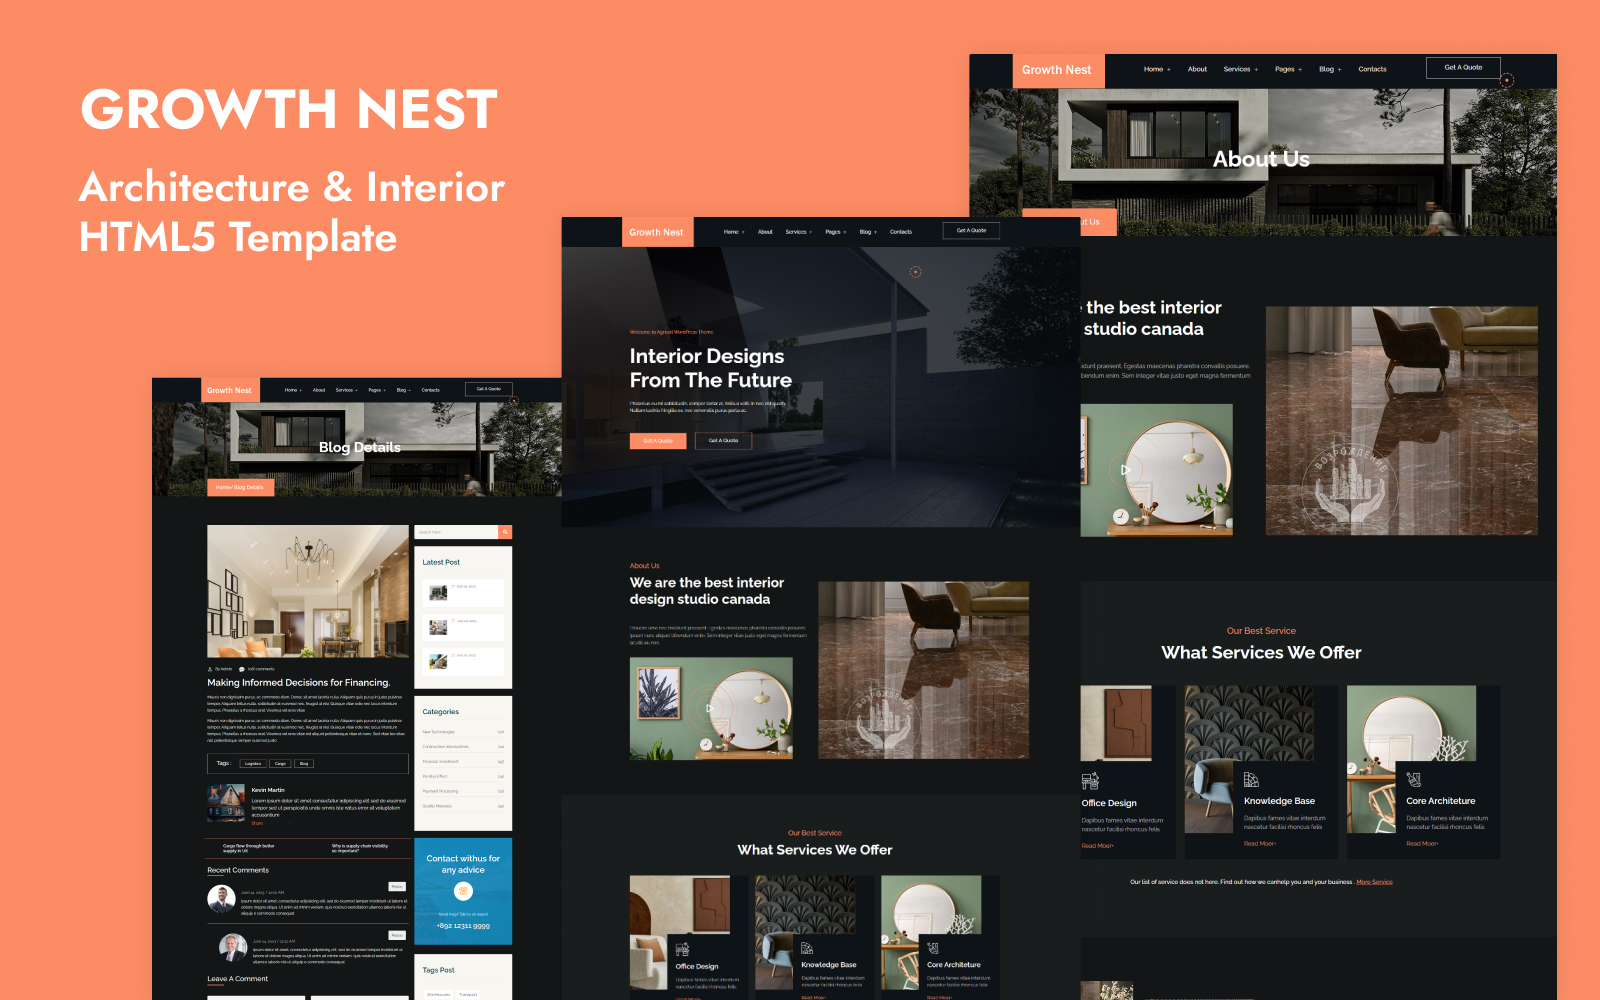 Growth Nest- Architecture & Interior HTML5 Template